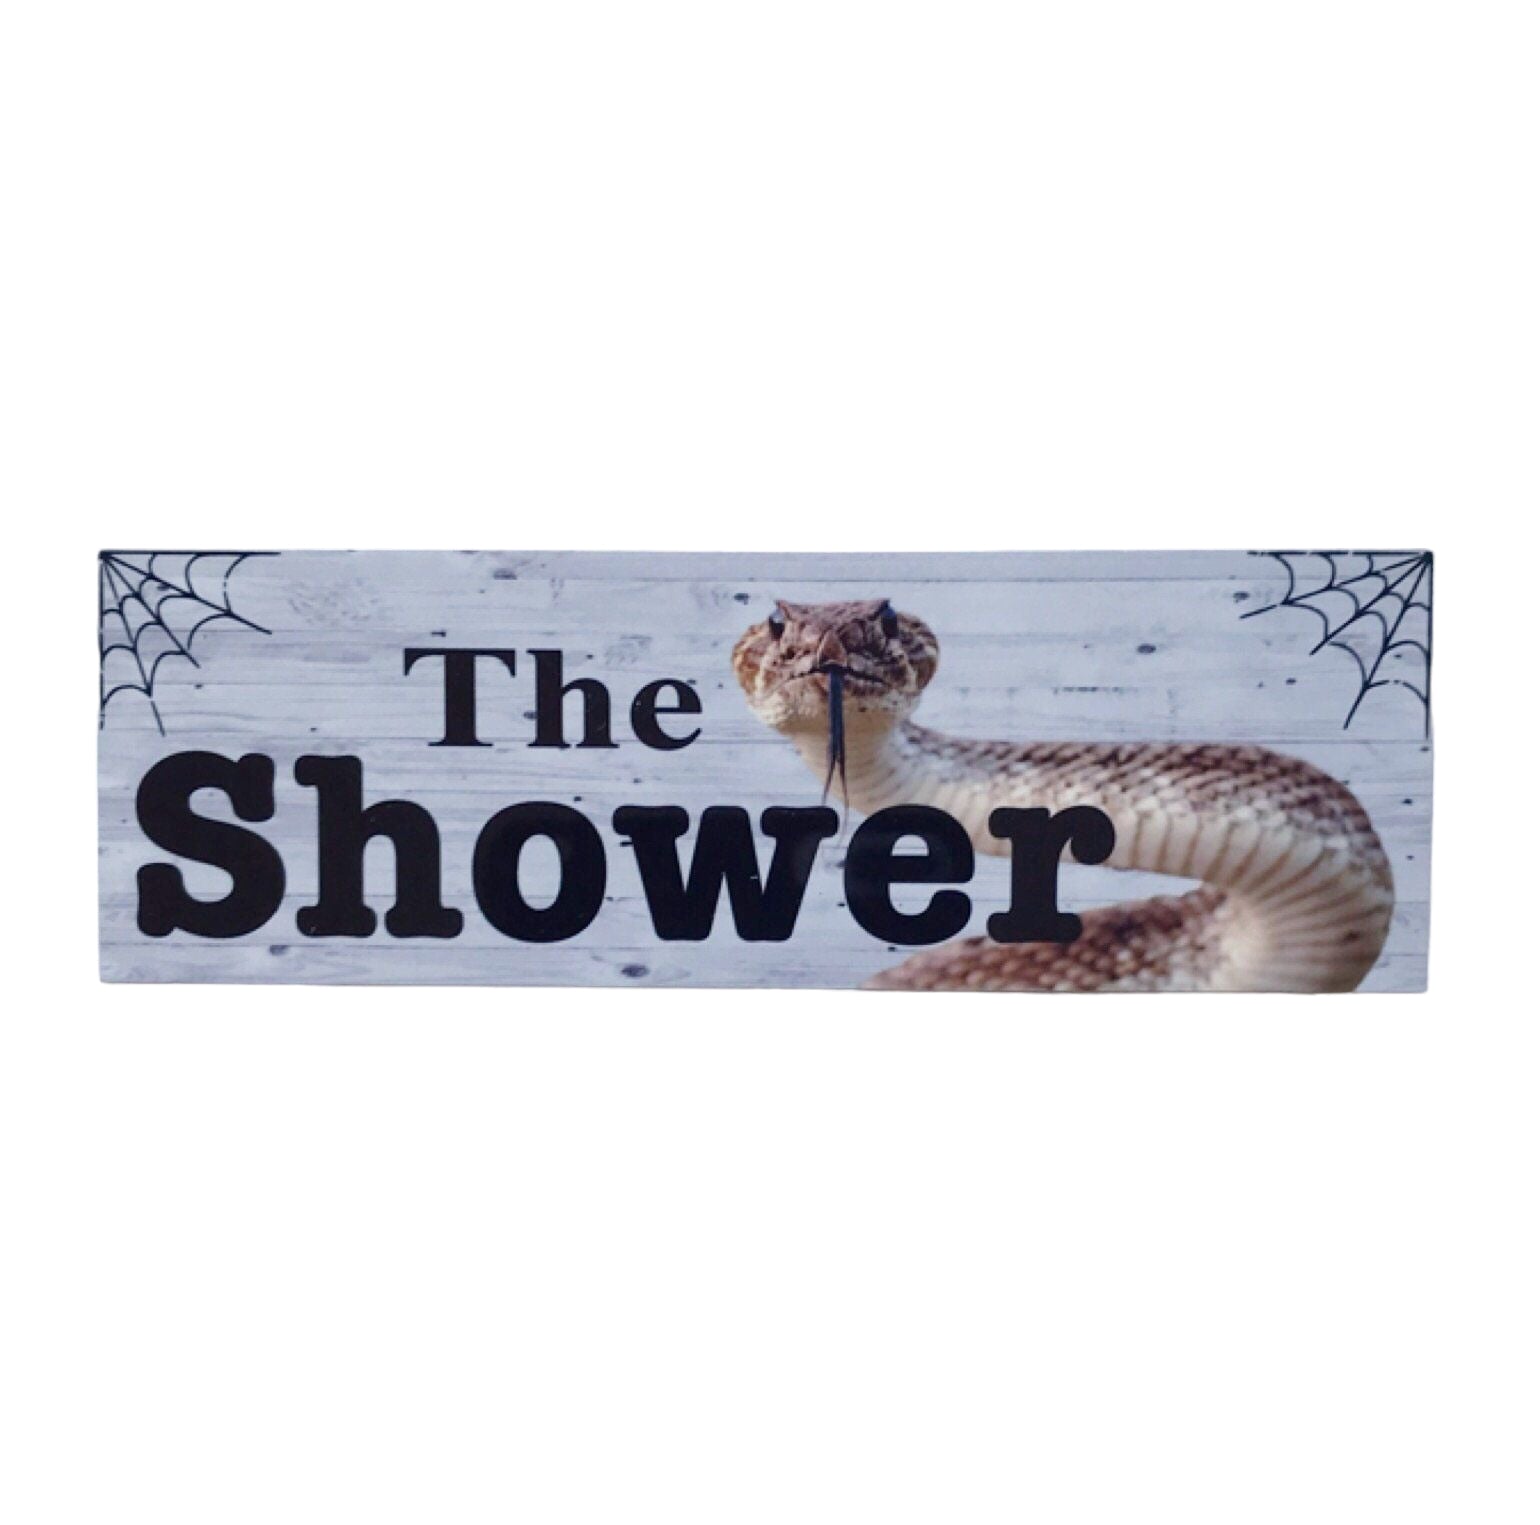 The Shower with Snake Outback Sign - The Renmy Store Homewares & Gifts 